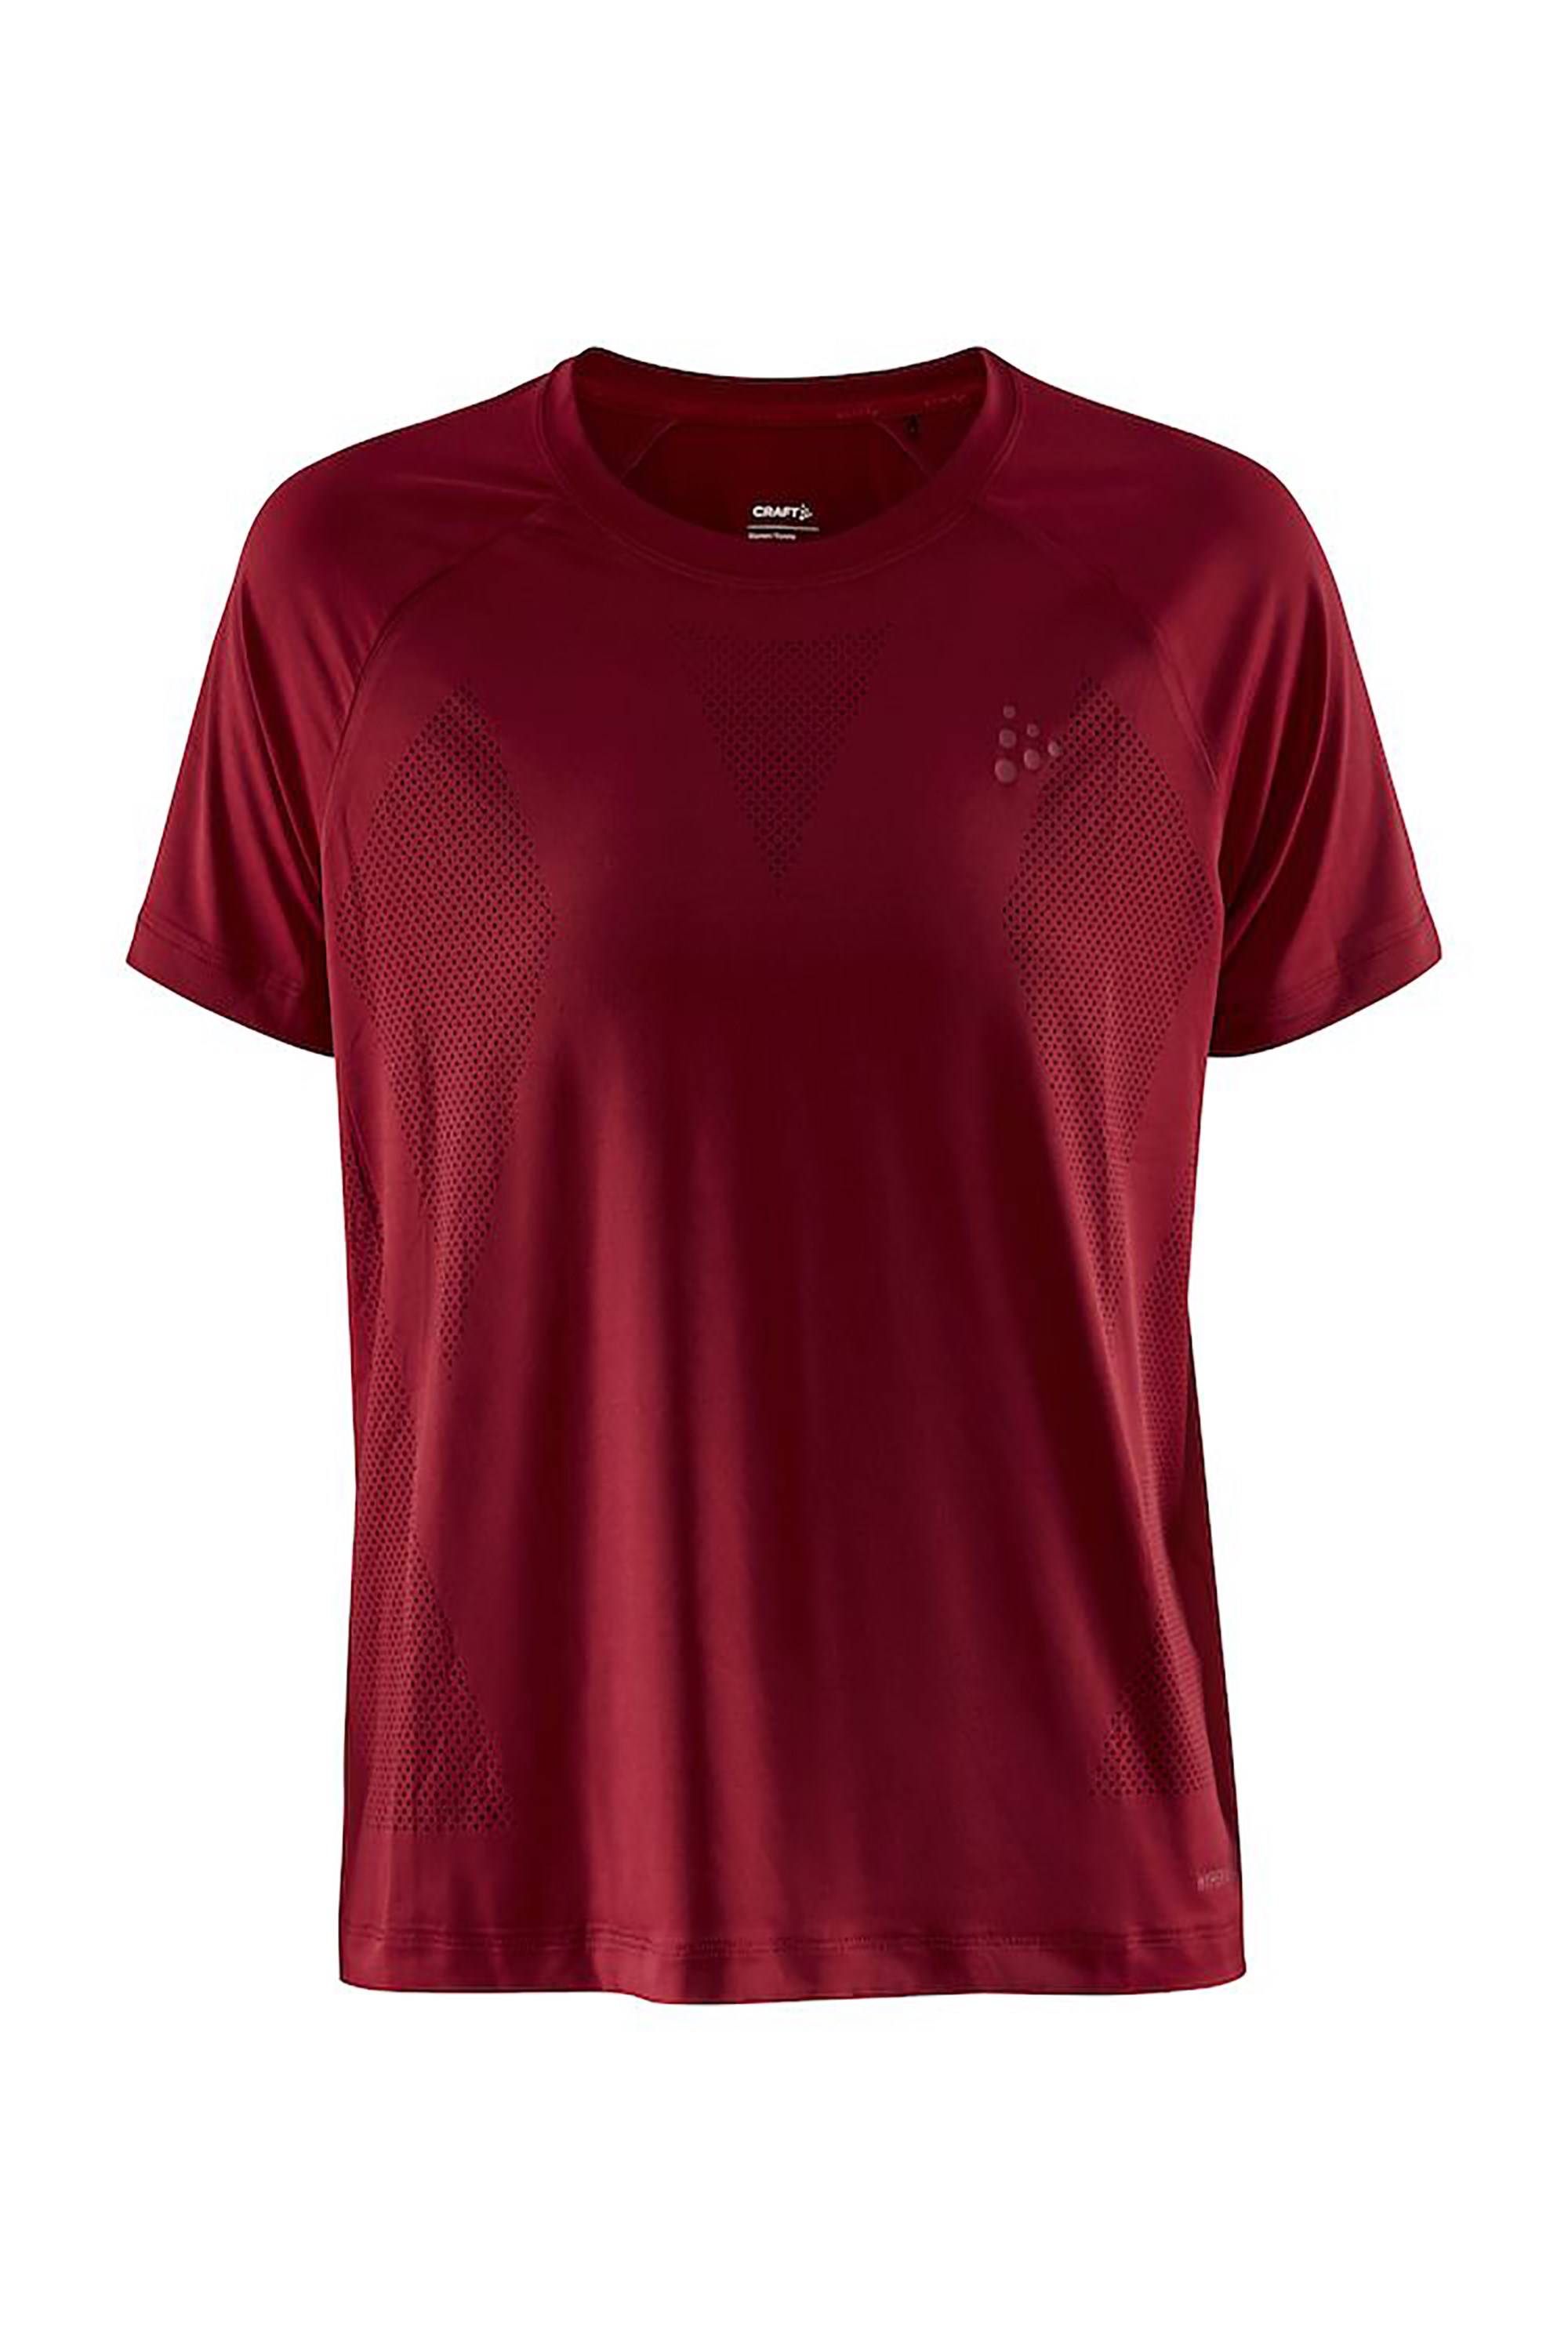 ADV Charge Womens Perforated Tee -